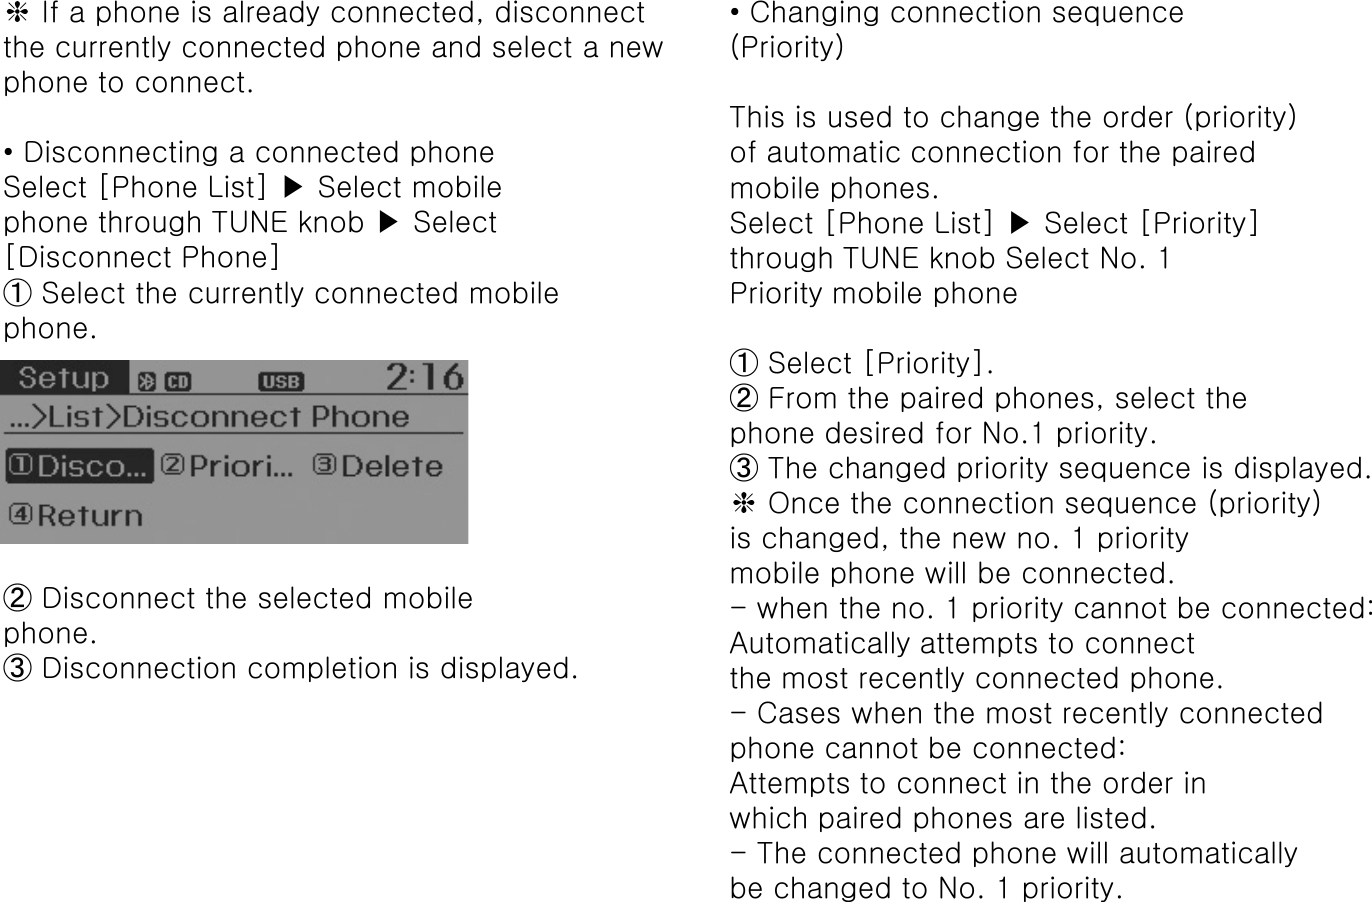 ❈If a phone is already connected, disconnectthe currently connected phone and select a new phone to connect.• Disconnecting a connected phoneSelect [Phone List] ▶Select mobilephone through TUNE knob ▶Select[Disconnect Phone]➀Select the currently connected mobilephone.➁Disconnect the selected mobilephone.➂Disconnection completion is displayed.• Changing connection sequence(Priority)This is used to change the order (priority)of automatic connection for the pairedmobile phones.Select [Phone List] ▶Select [Priority]through TUNE knob Select No. 1Priority mobile phone➀Select [Priority].➁From the paired phones, select thephone desired for No.1 priority.➂The changed priority sequence is displayed.❈Once the connection sequence (priority)is changed, the new no. 1 prioritymobile phone will be connected.-when the no. 1 priority cannot be connected:Automatically attempts to connectthe most recently connected phone.-Cases when the most recently connectedphone cannot be connected:Attempts to connect in the order inwhich paired phones are listed.-The connected phone will automaticallybe changed to No. 1 priority.